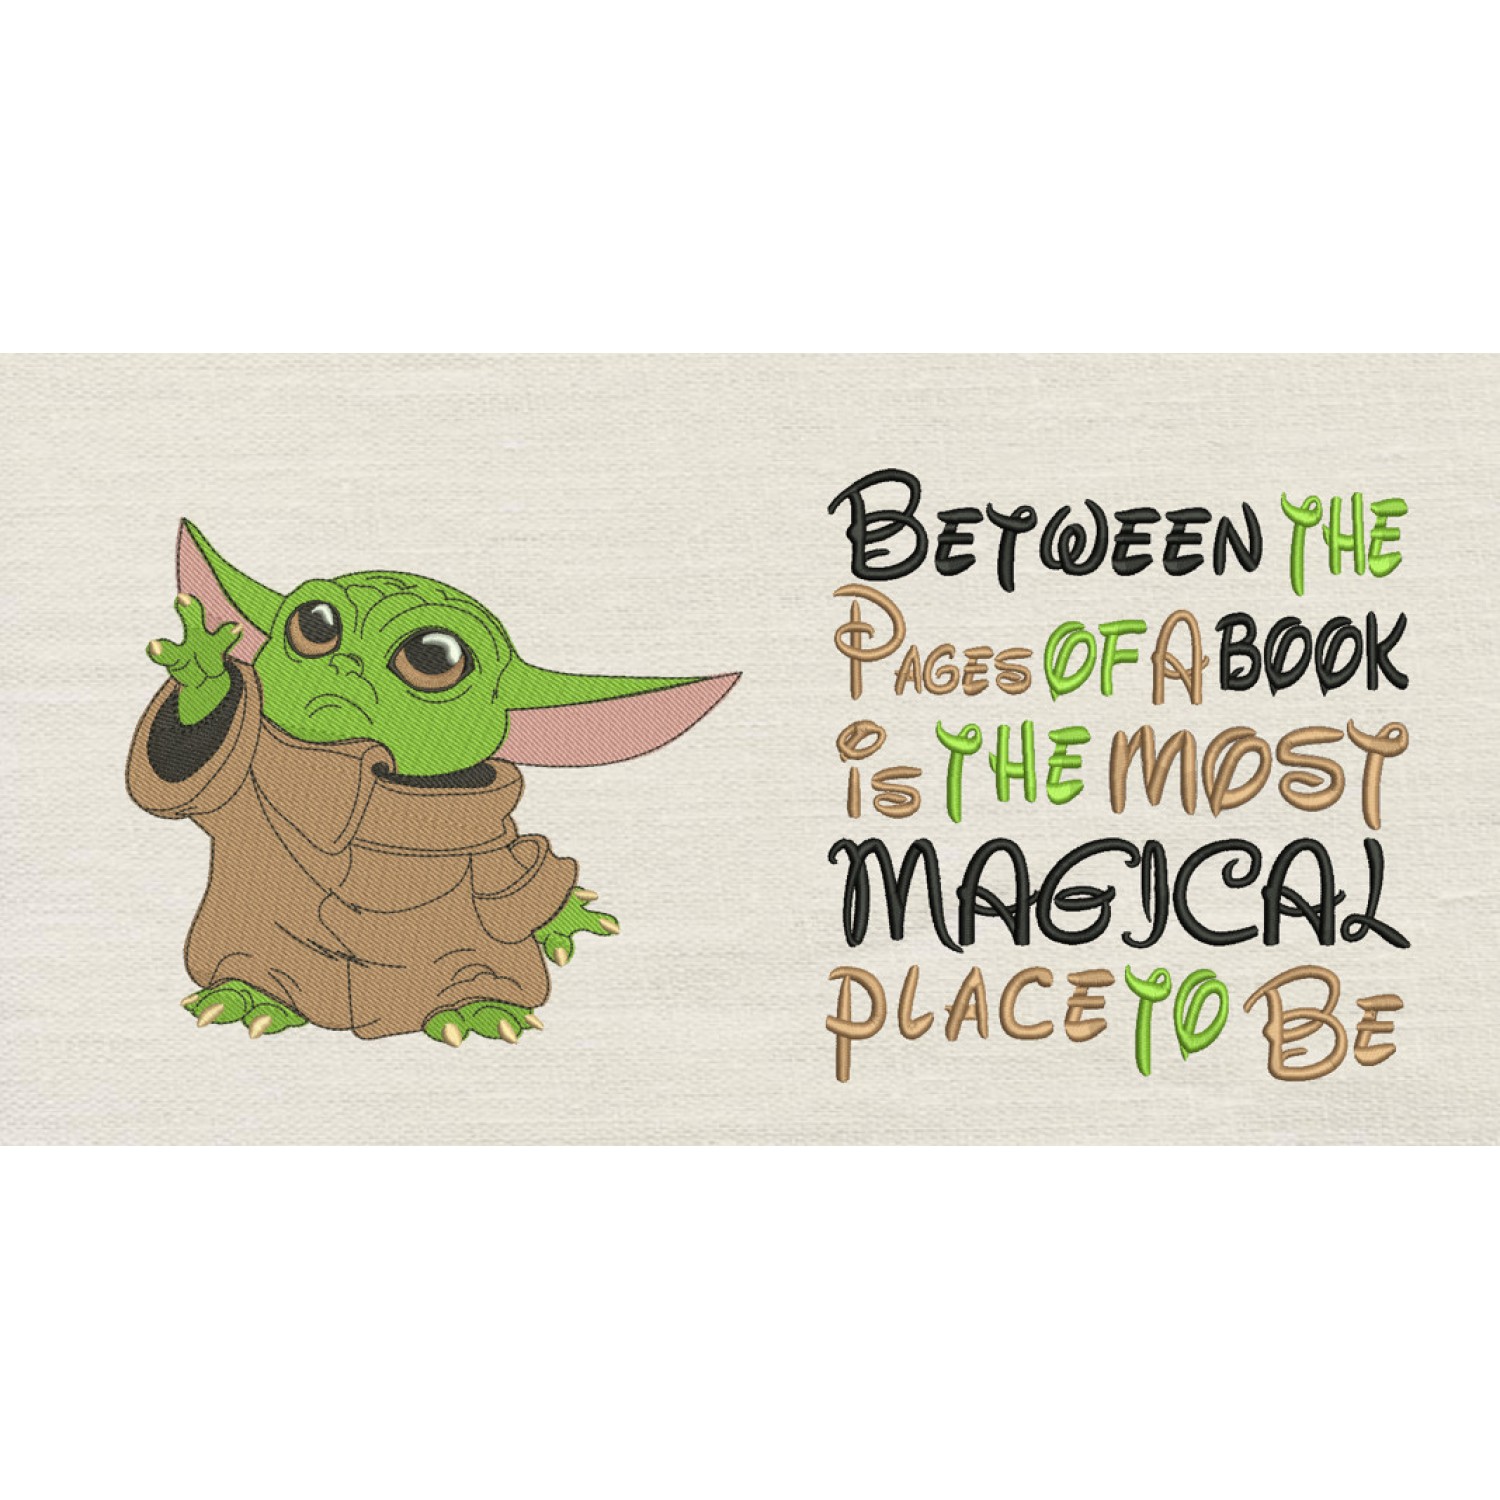 Baby yoda With Between the Pages